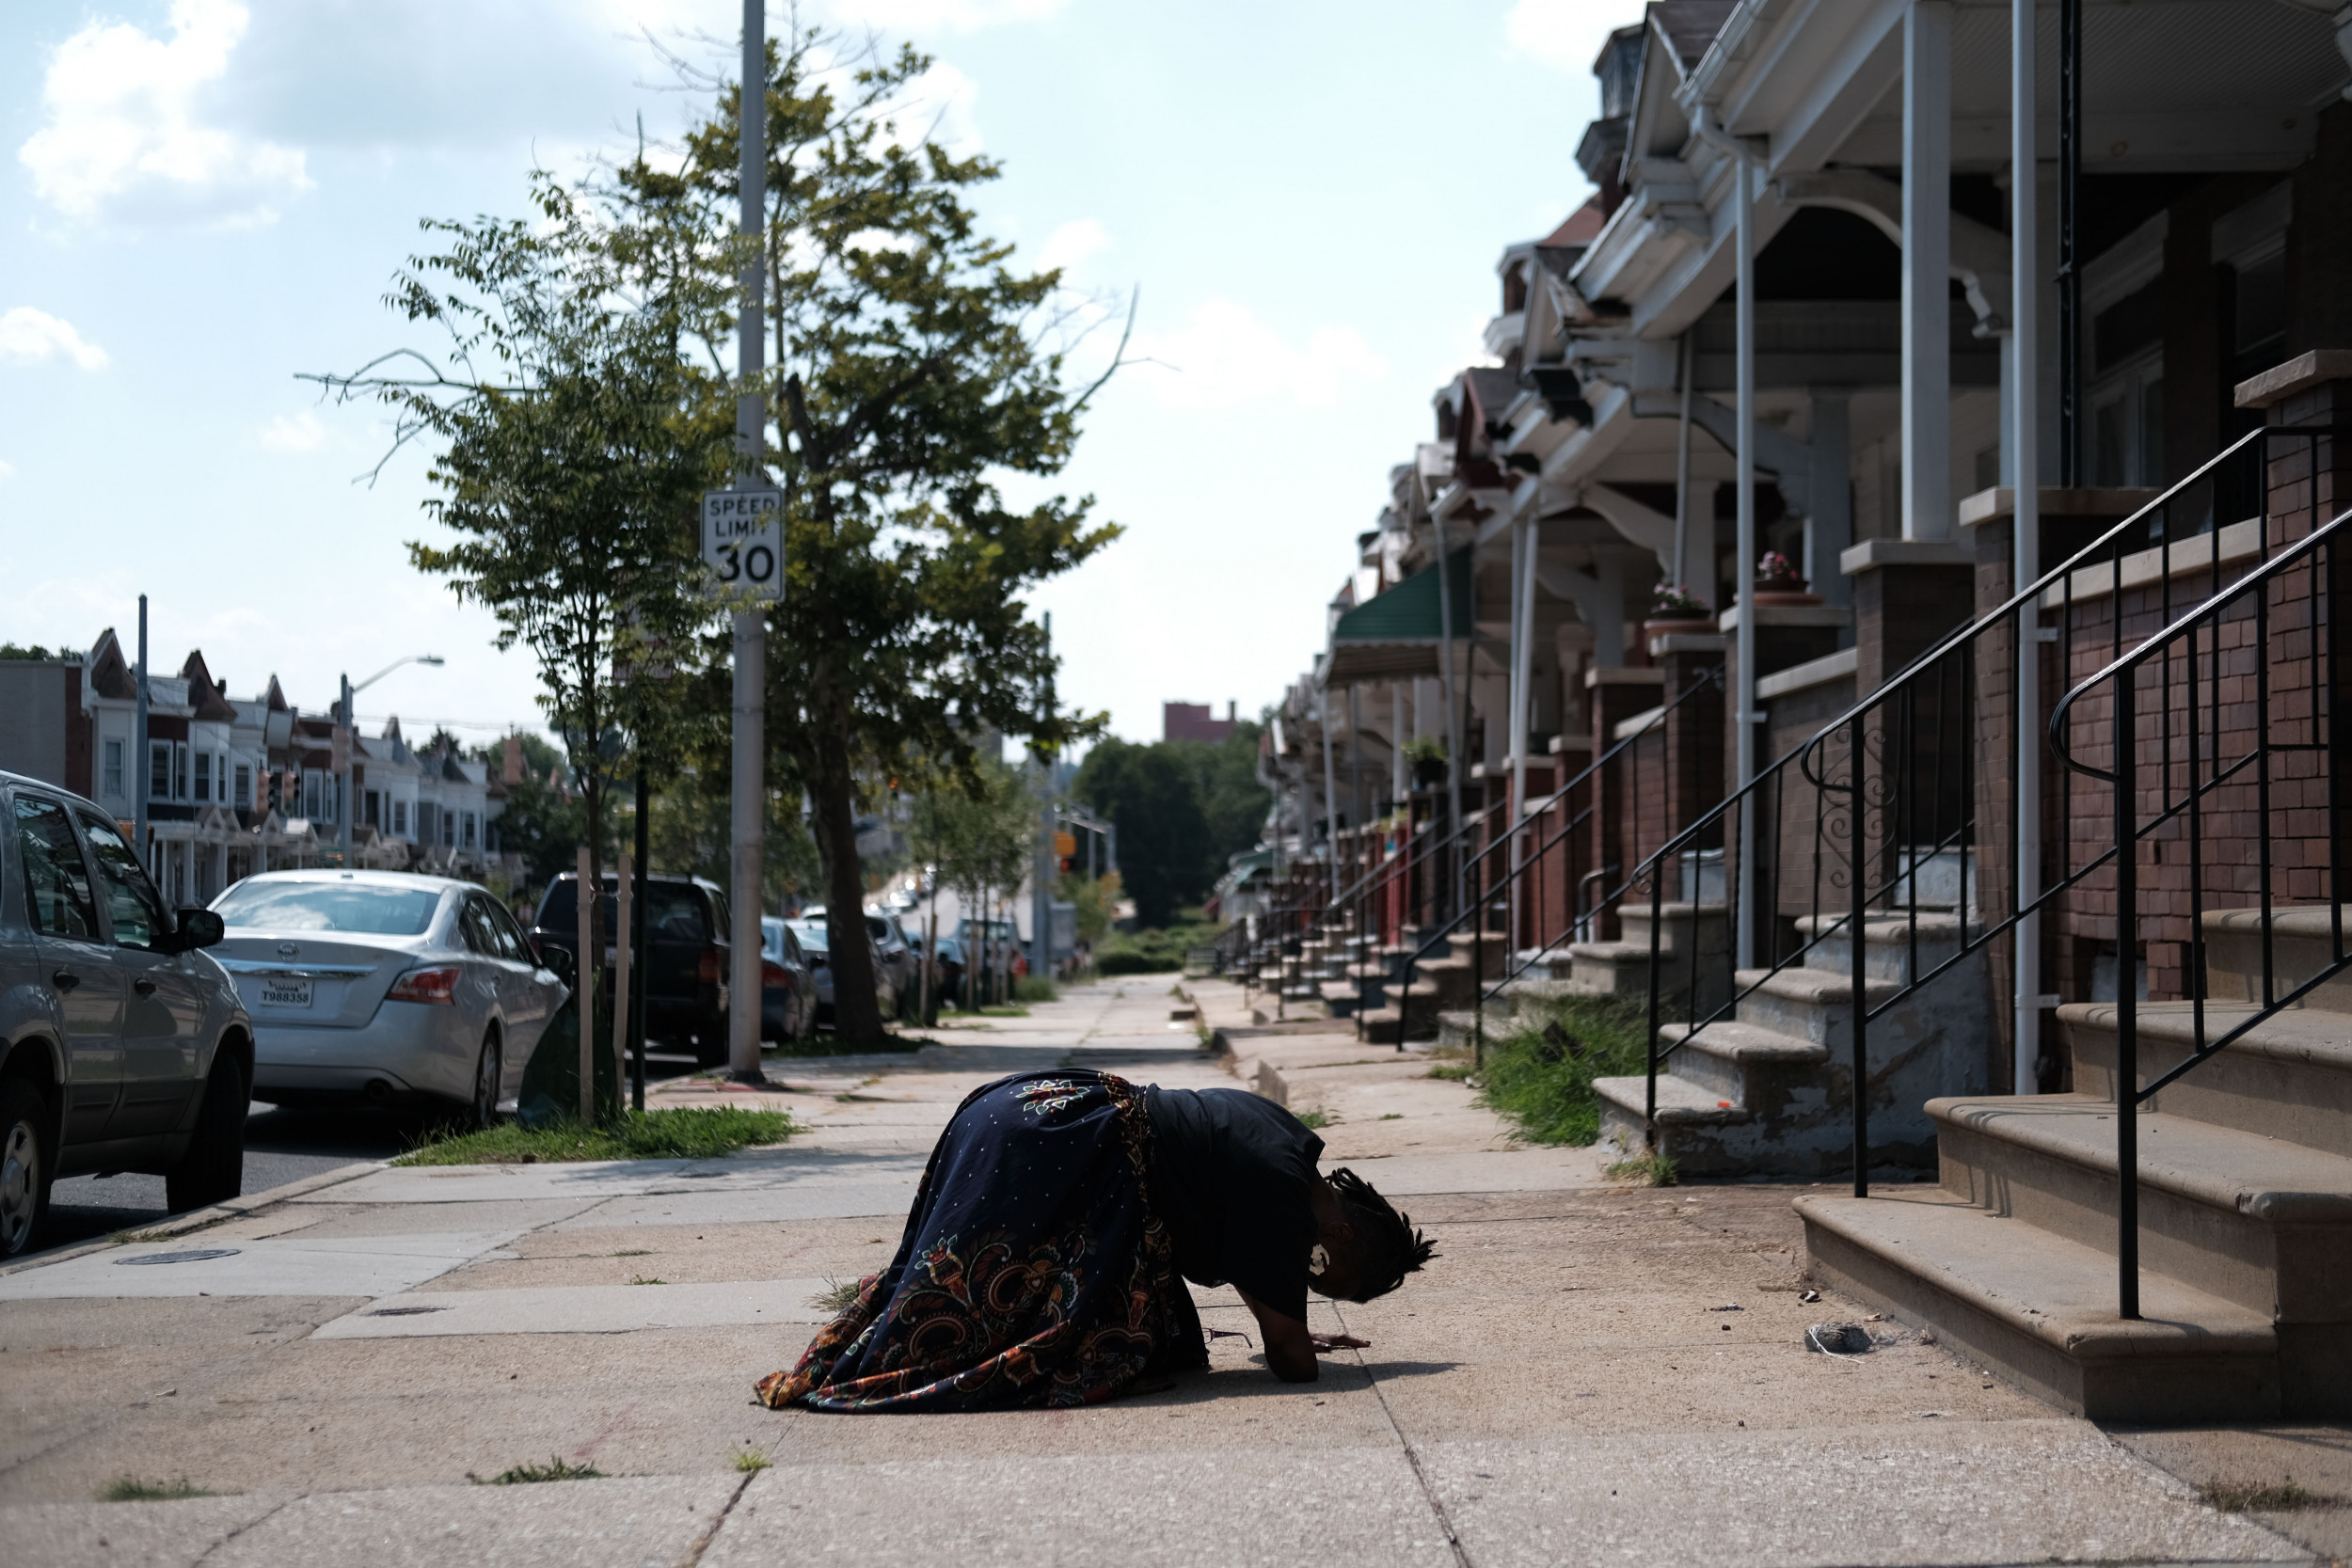 Trump May Be Crude But Baltimore Really Is Spiraling—thats Why I Left Opinion